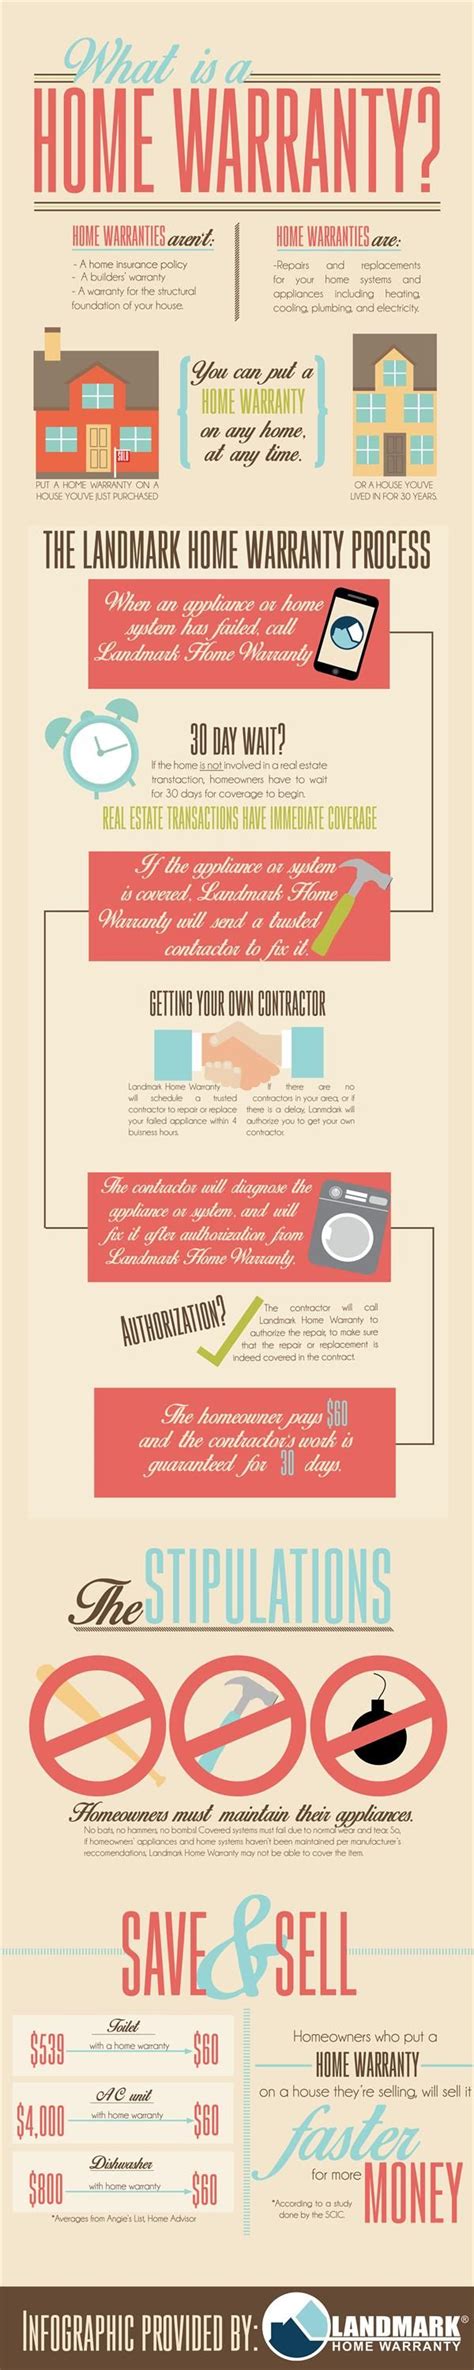 what is a home warranty infographic home warranty infographic buying your first home